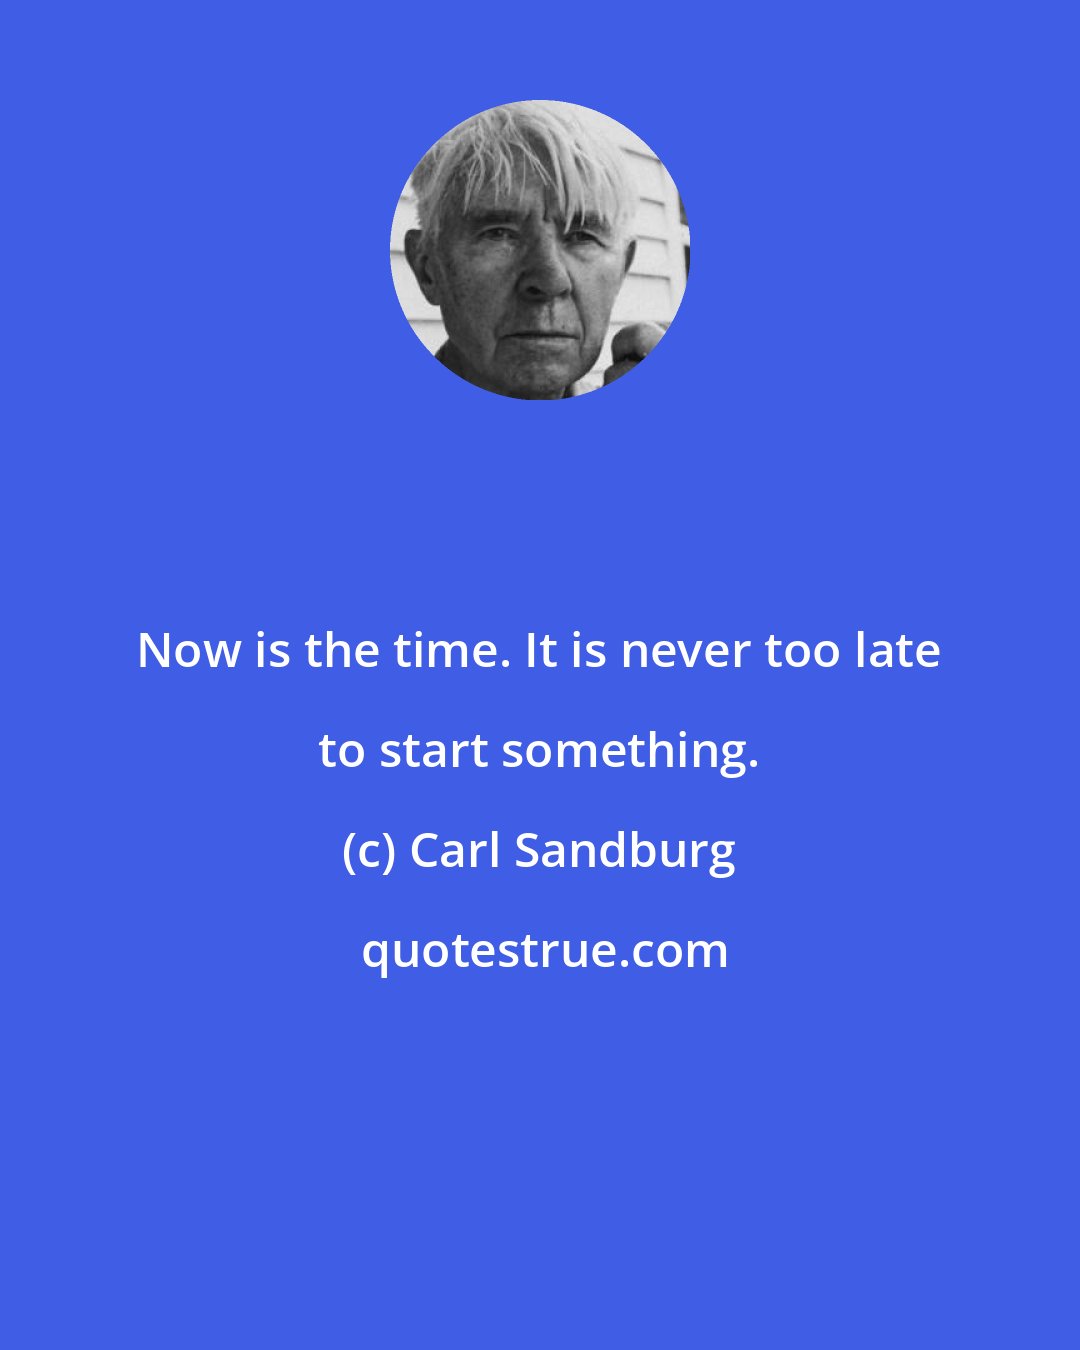 Carl Sandburg: Now is the time. It is never too late to start something.